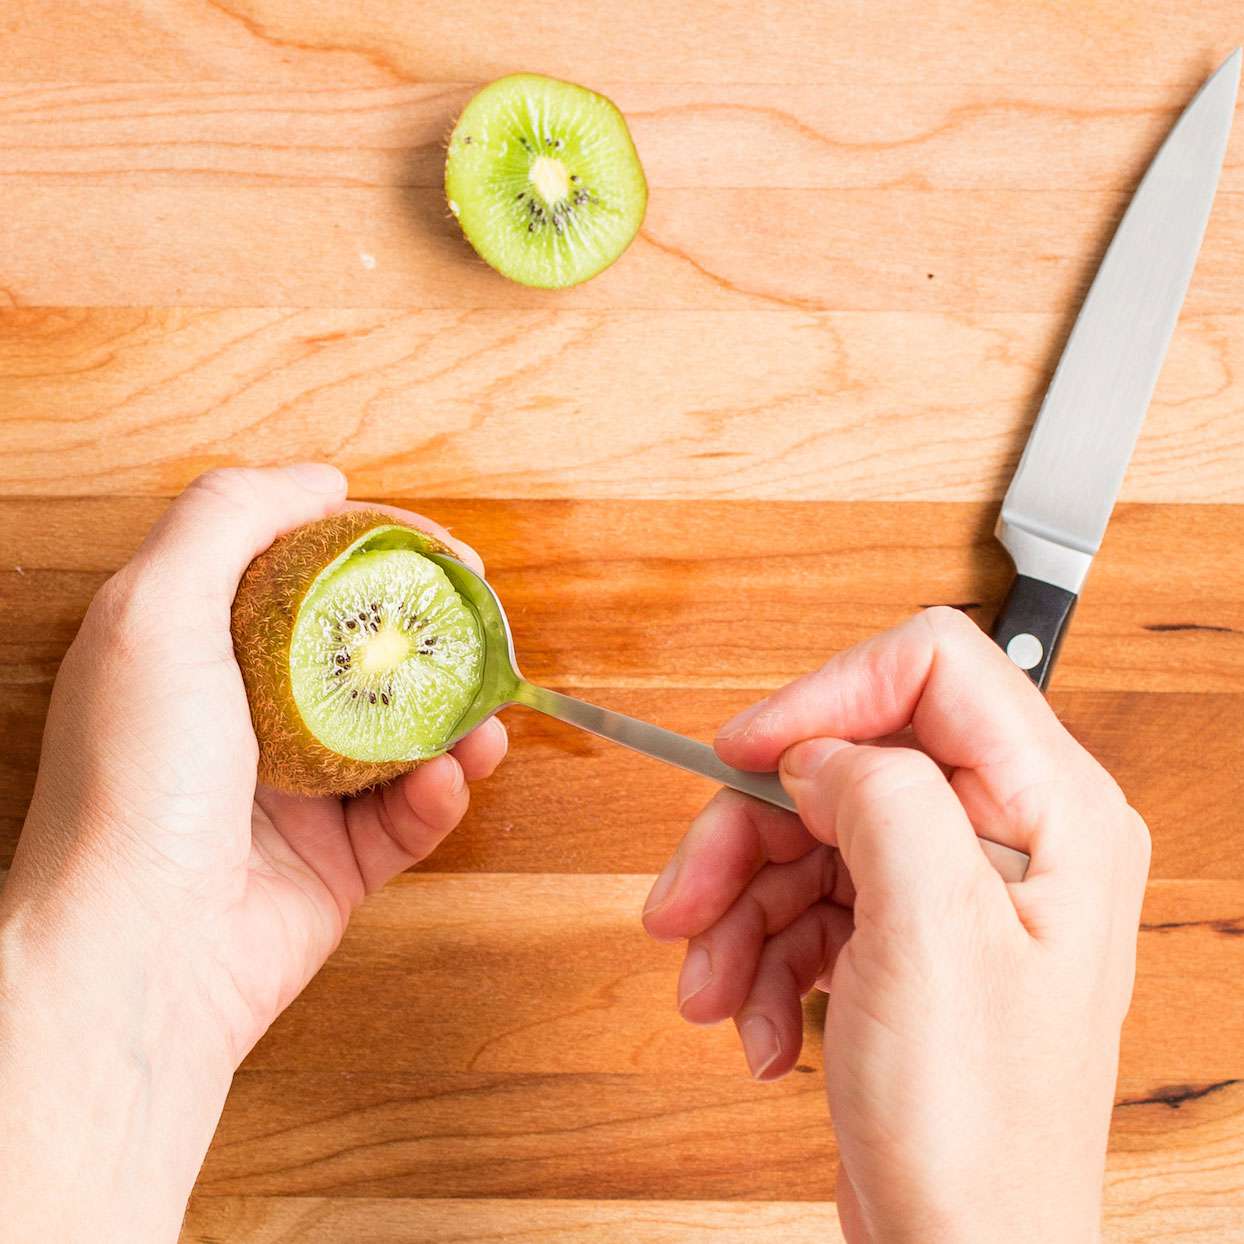 scooping kiwi out of skin with a spoon